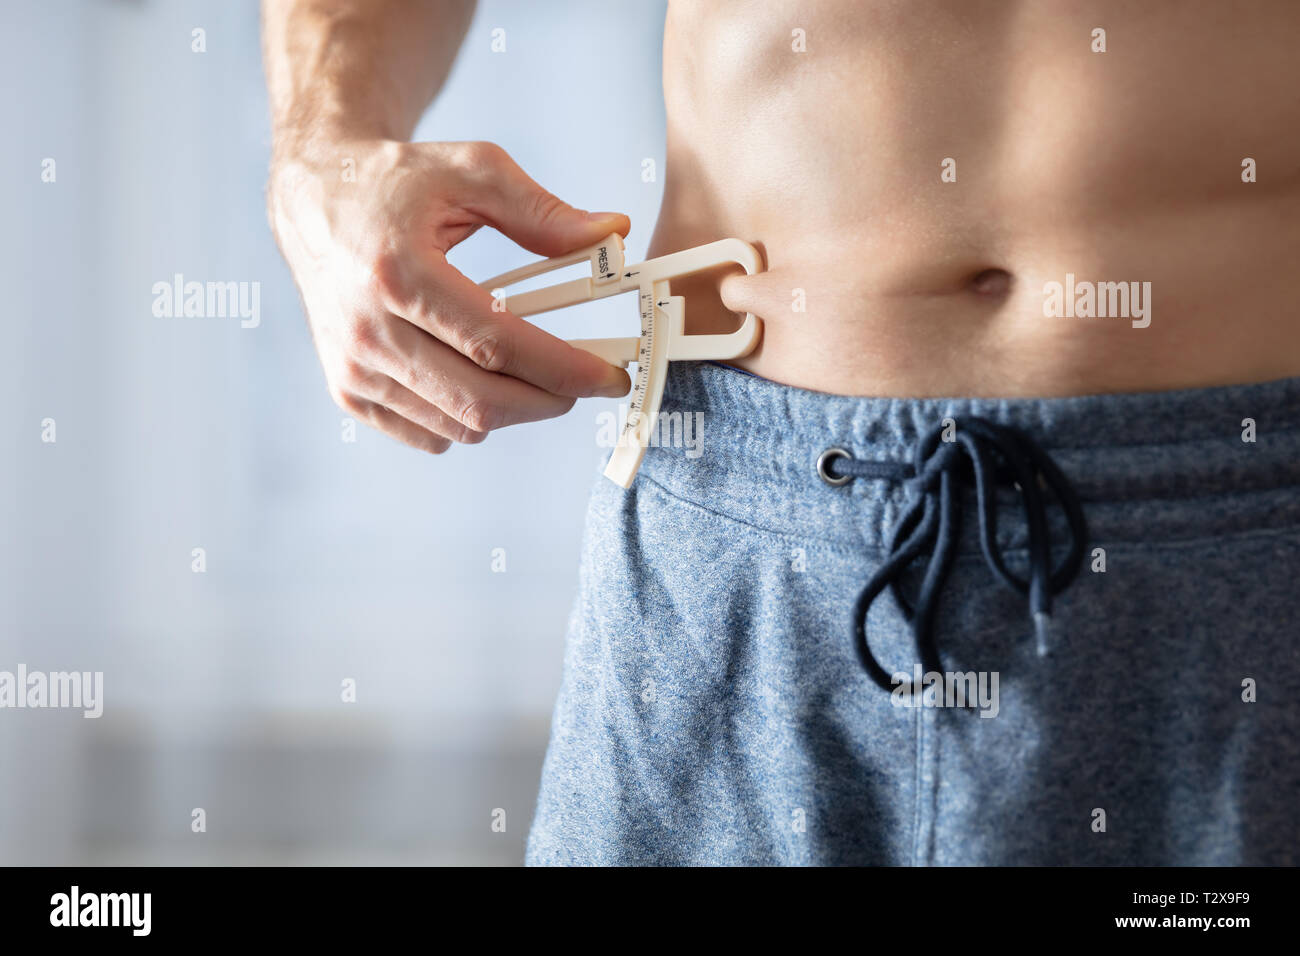 Close-up Of A Athlete Person Measuring His Body Fat With Caliper In The Gym Stock Photo